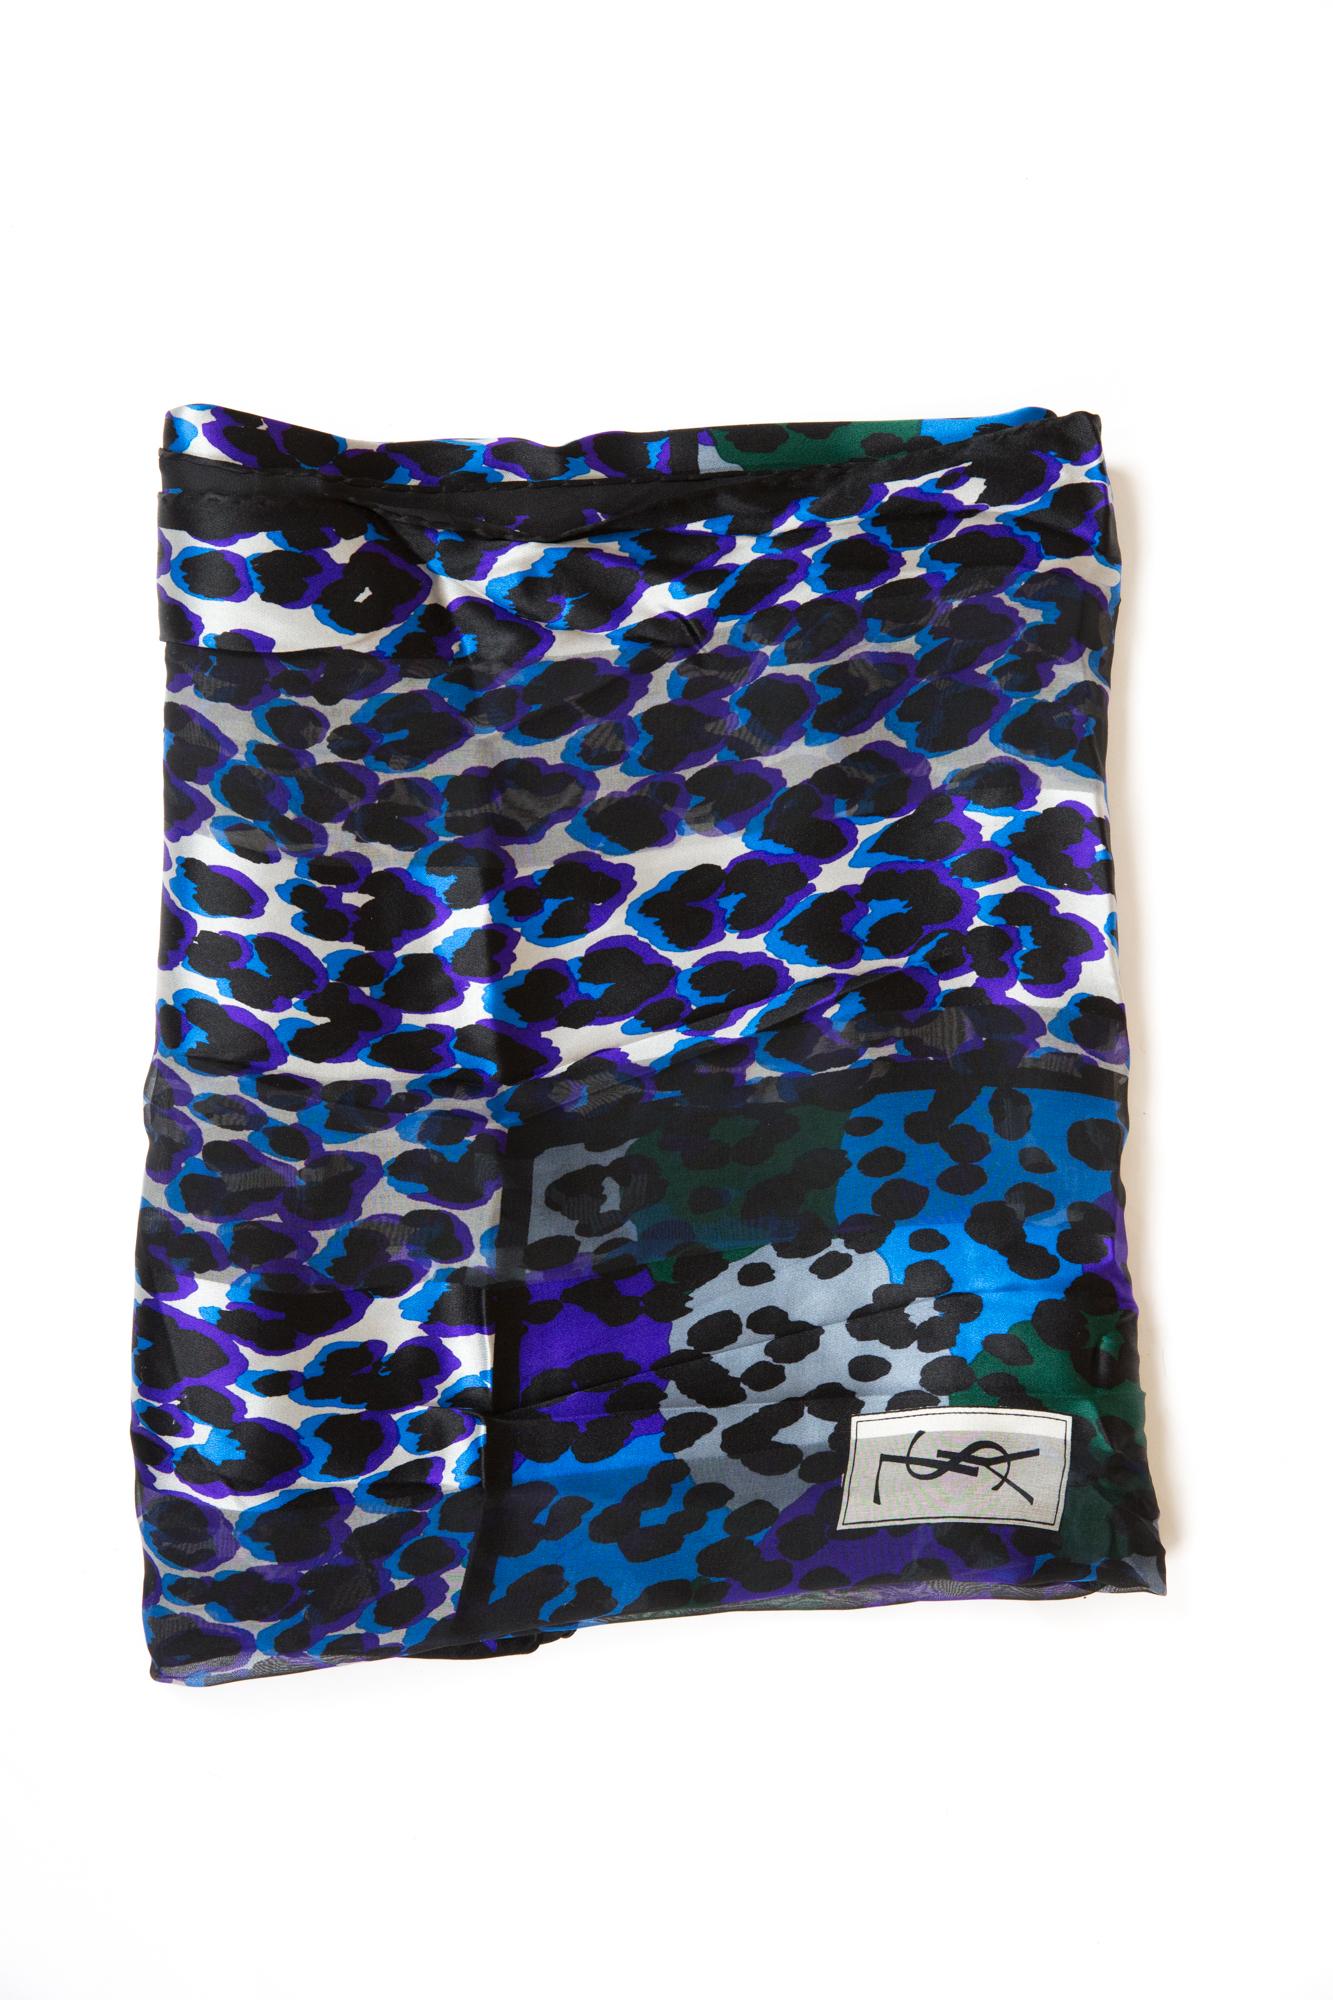 Gorgeous Saint Laurent YSL multicolour silk shawl ( 100% silk) featuring a large size, a blue & purple animal print, some mousseline parts and a logo signature.
Marked YSL
54.3 in. (138cm) X 53.5 in. (136cm) In excellent vintage condition.  
Made in